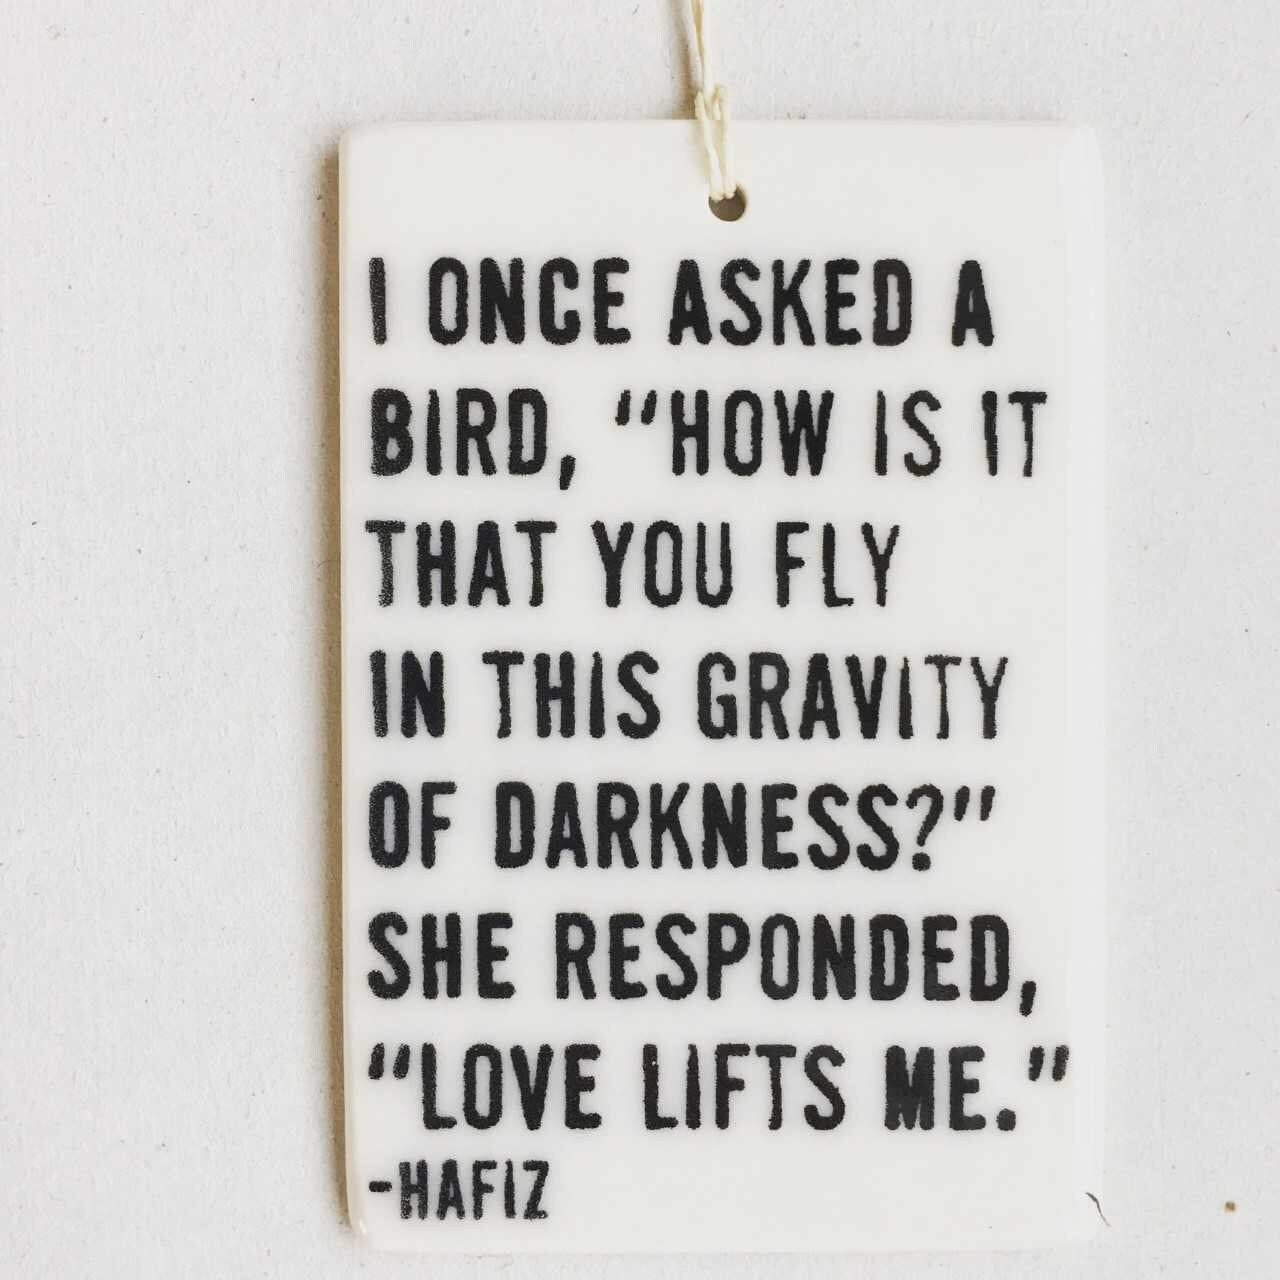 hafiz wall hanging | hafiz quote | hafez quote | ceramic wall tag | screenprinted ceramics | bereavement gift | meaningful gift | love quote